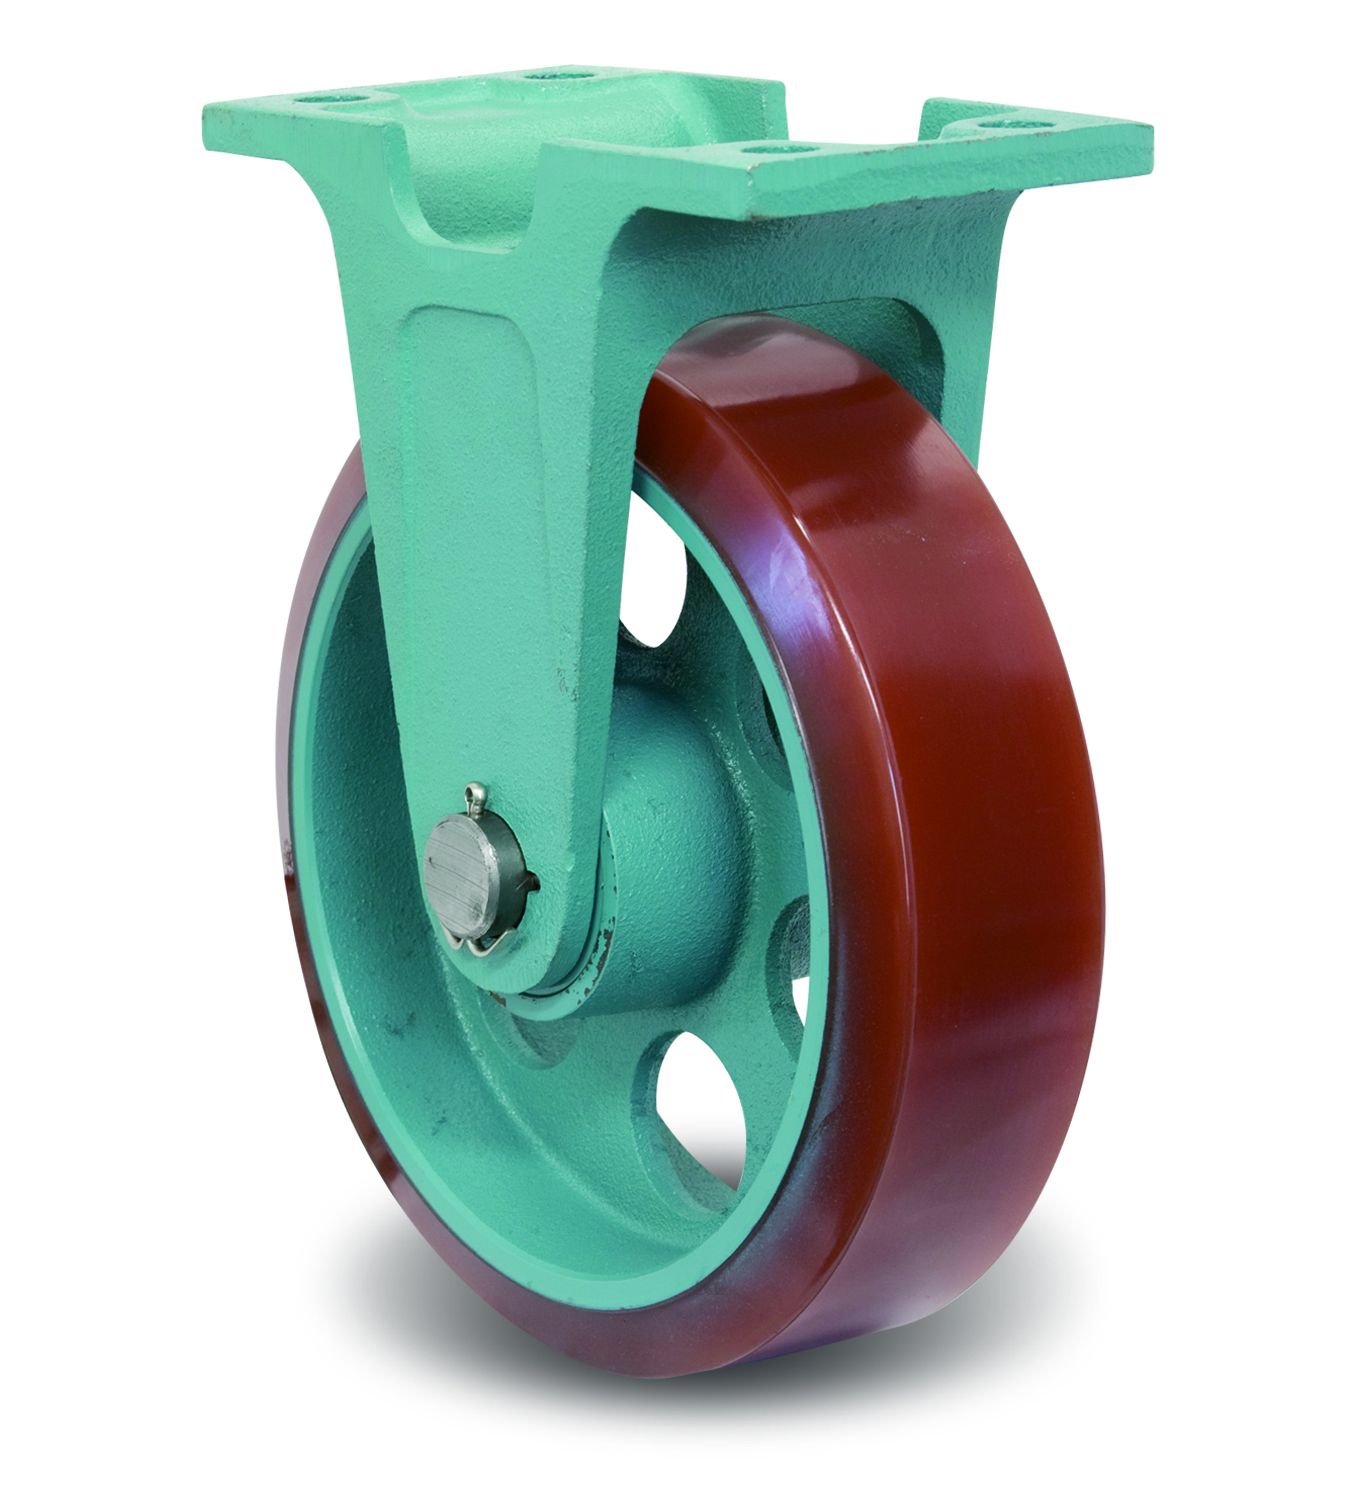 Ductile Caster - Wide - Fixed - MG-W with Metal Fittings - EU/MG-W (EUMG-W150X65) 